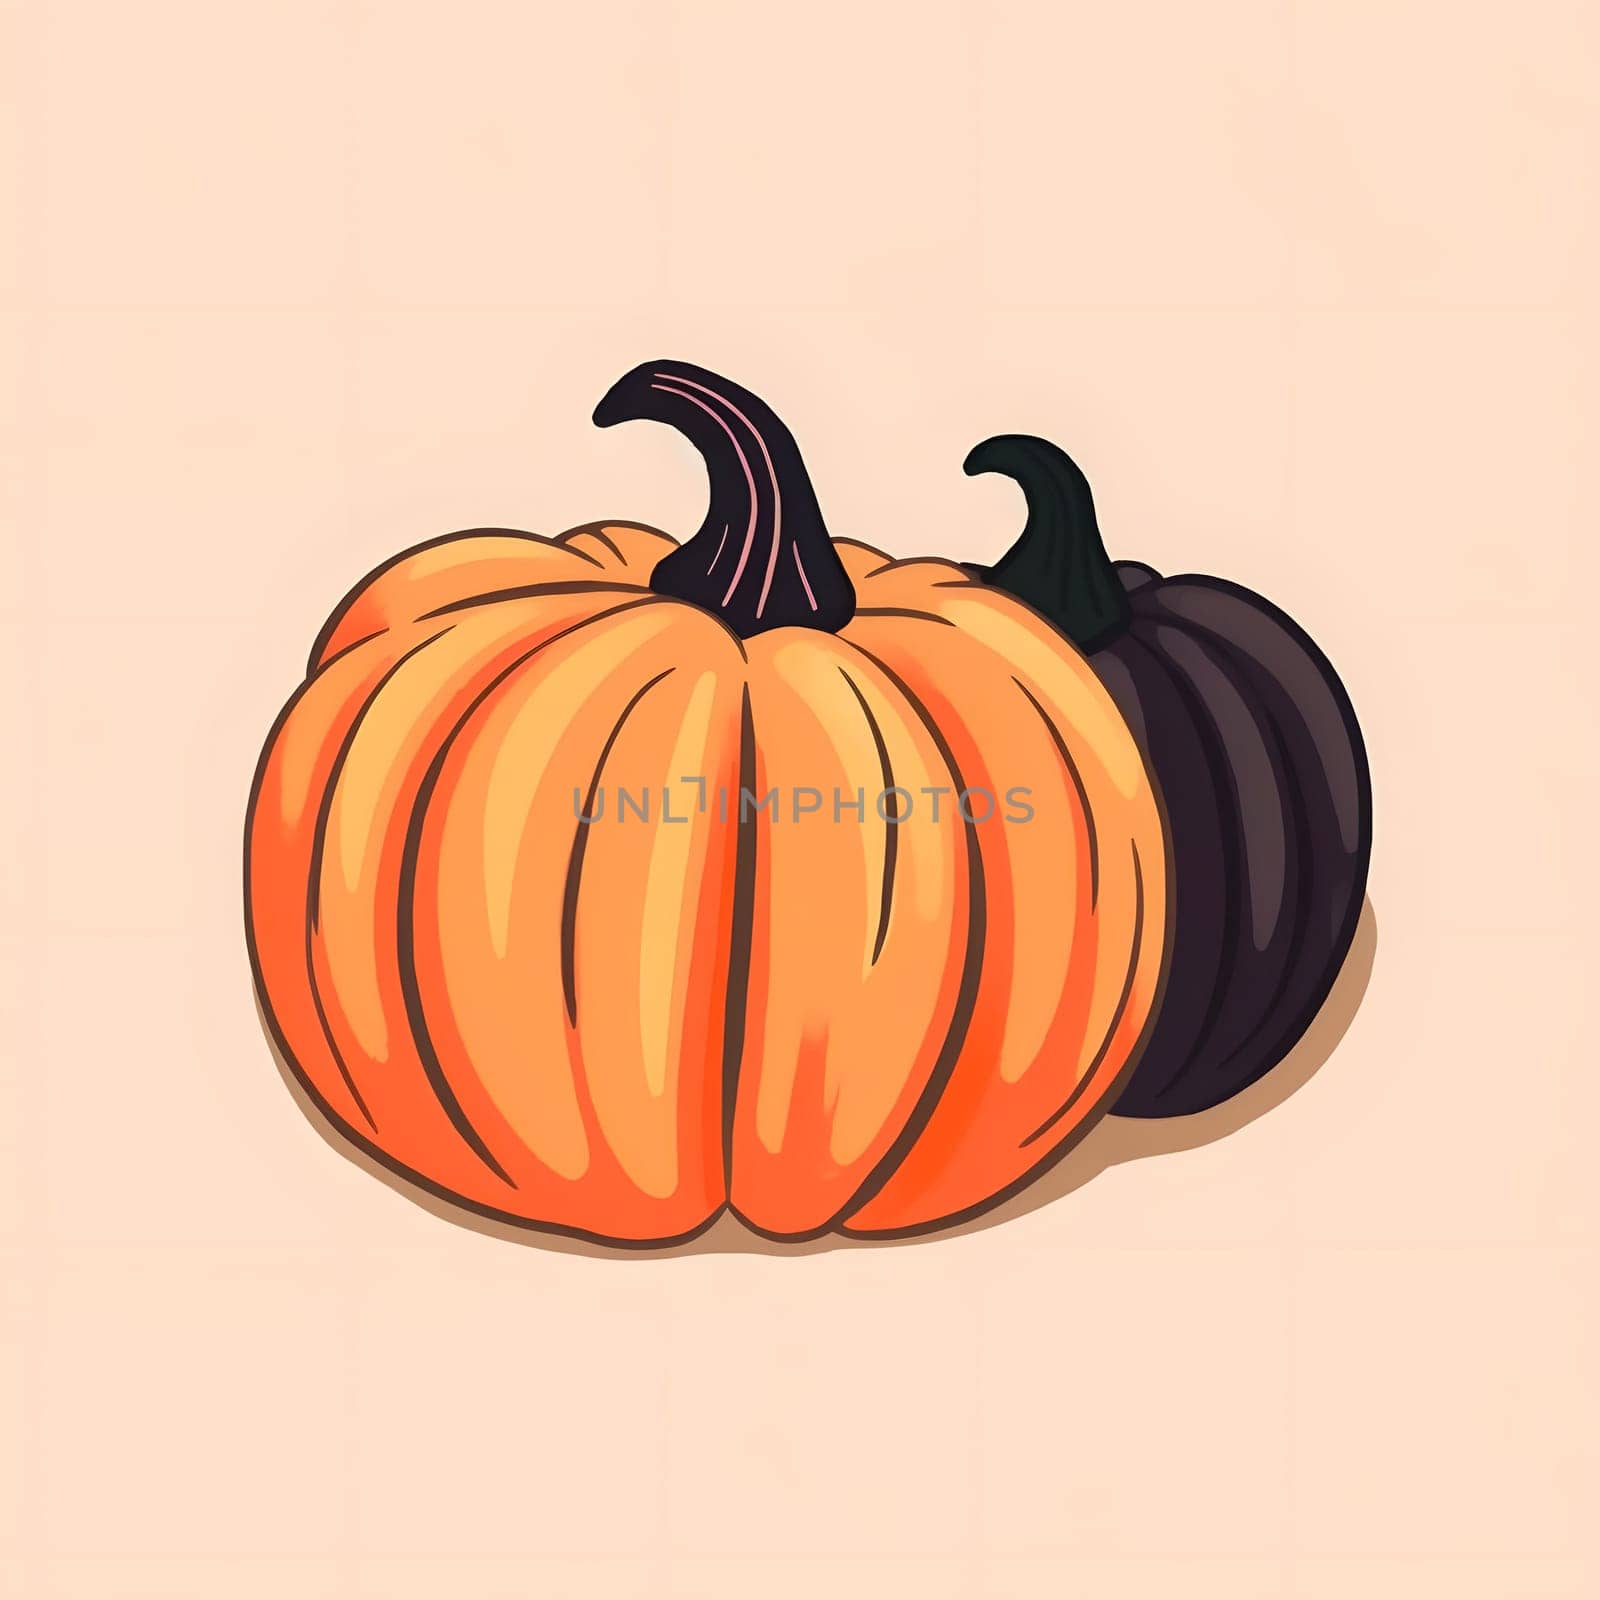 Orange and black pumpkin on light in isolated background. Pumpkin as a dish of thanksgiving for the harvest. An atmosphere of joy and celebration.